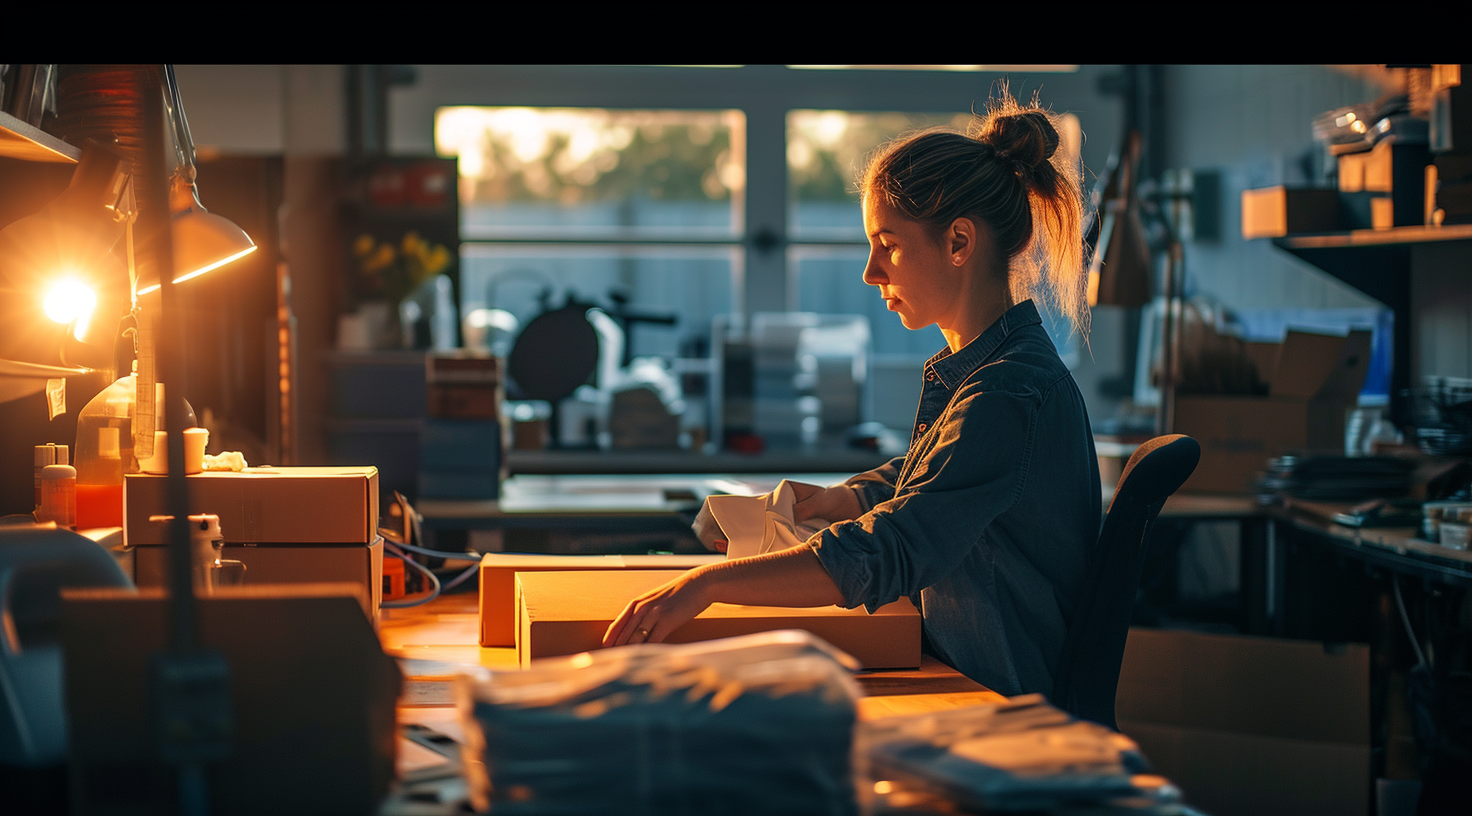 A diligent female employee focuses on packaging products in a small business shipping area as the sunset casts a warm glow.